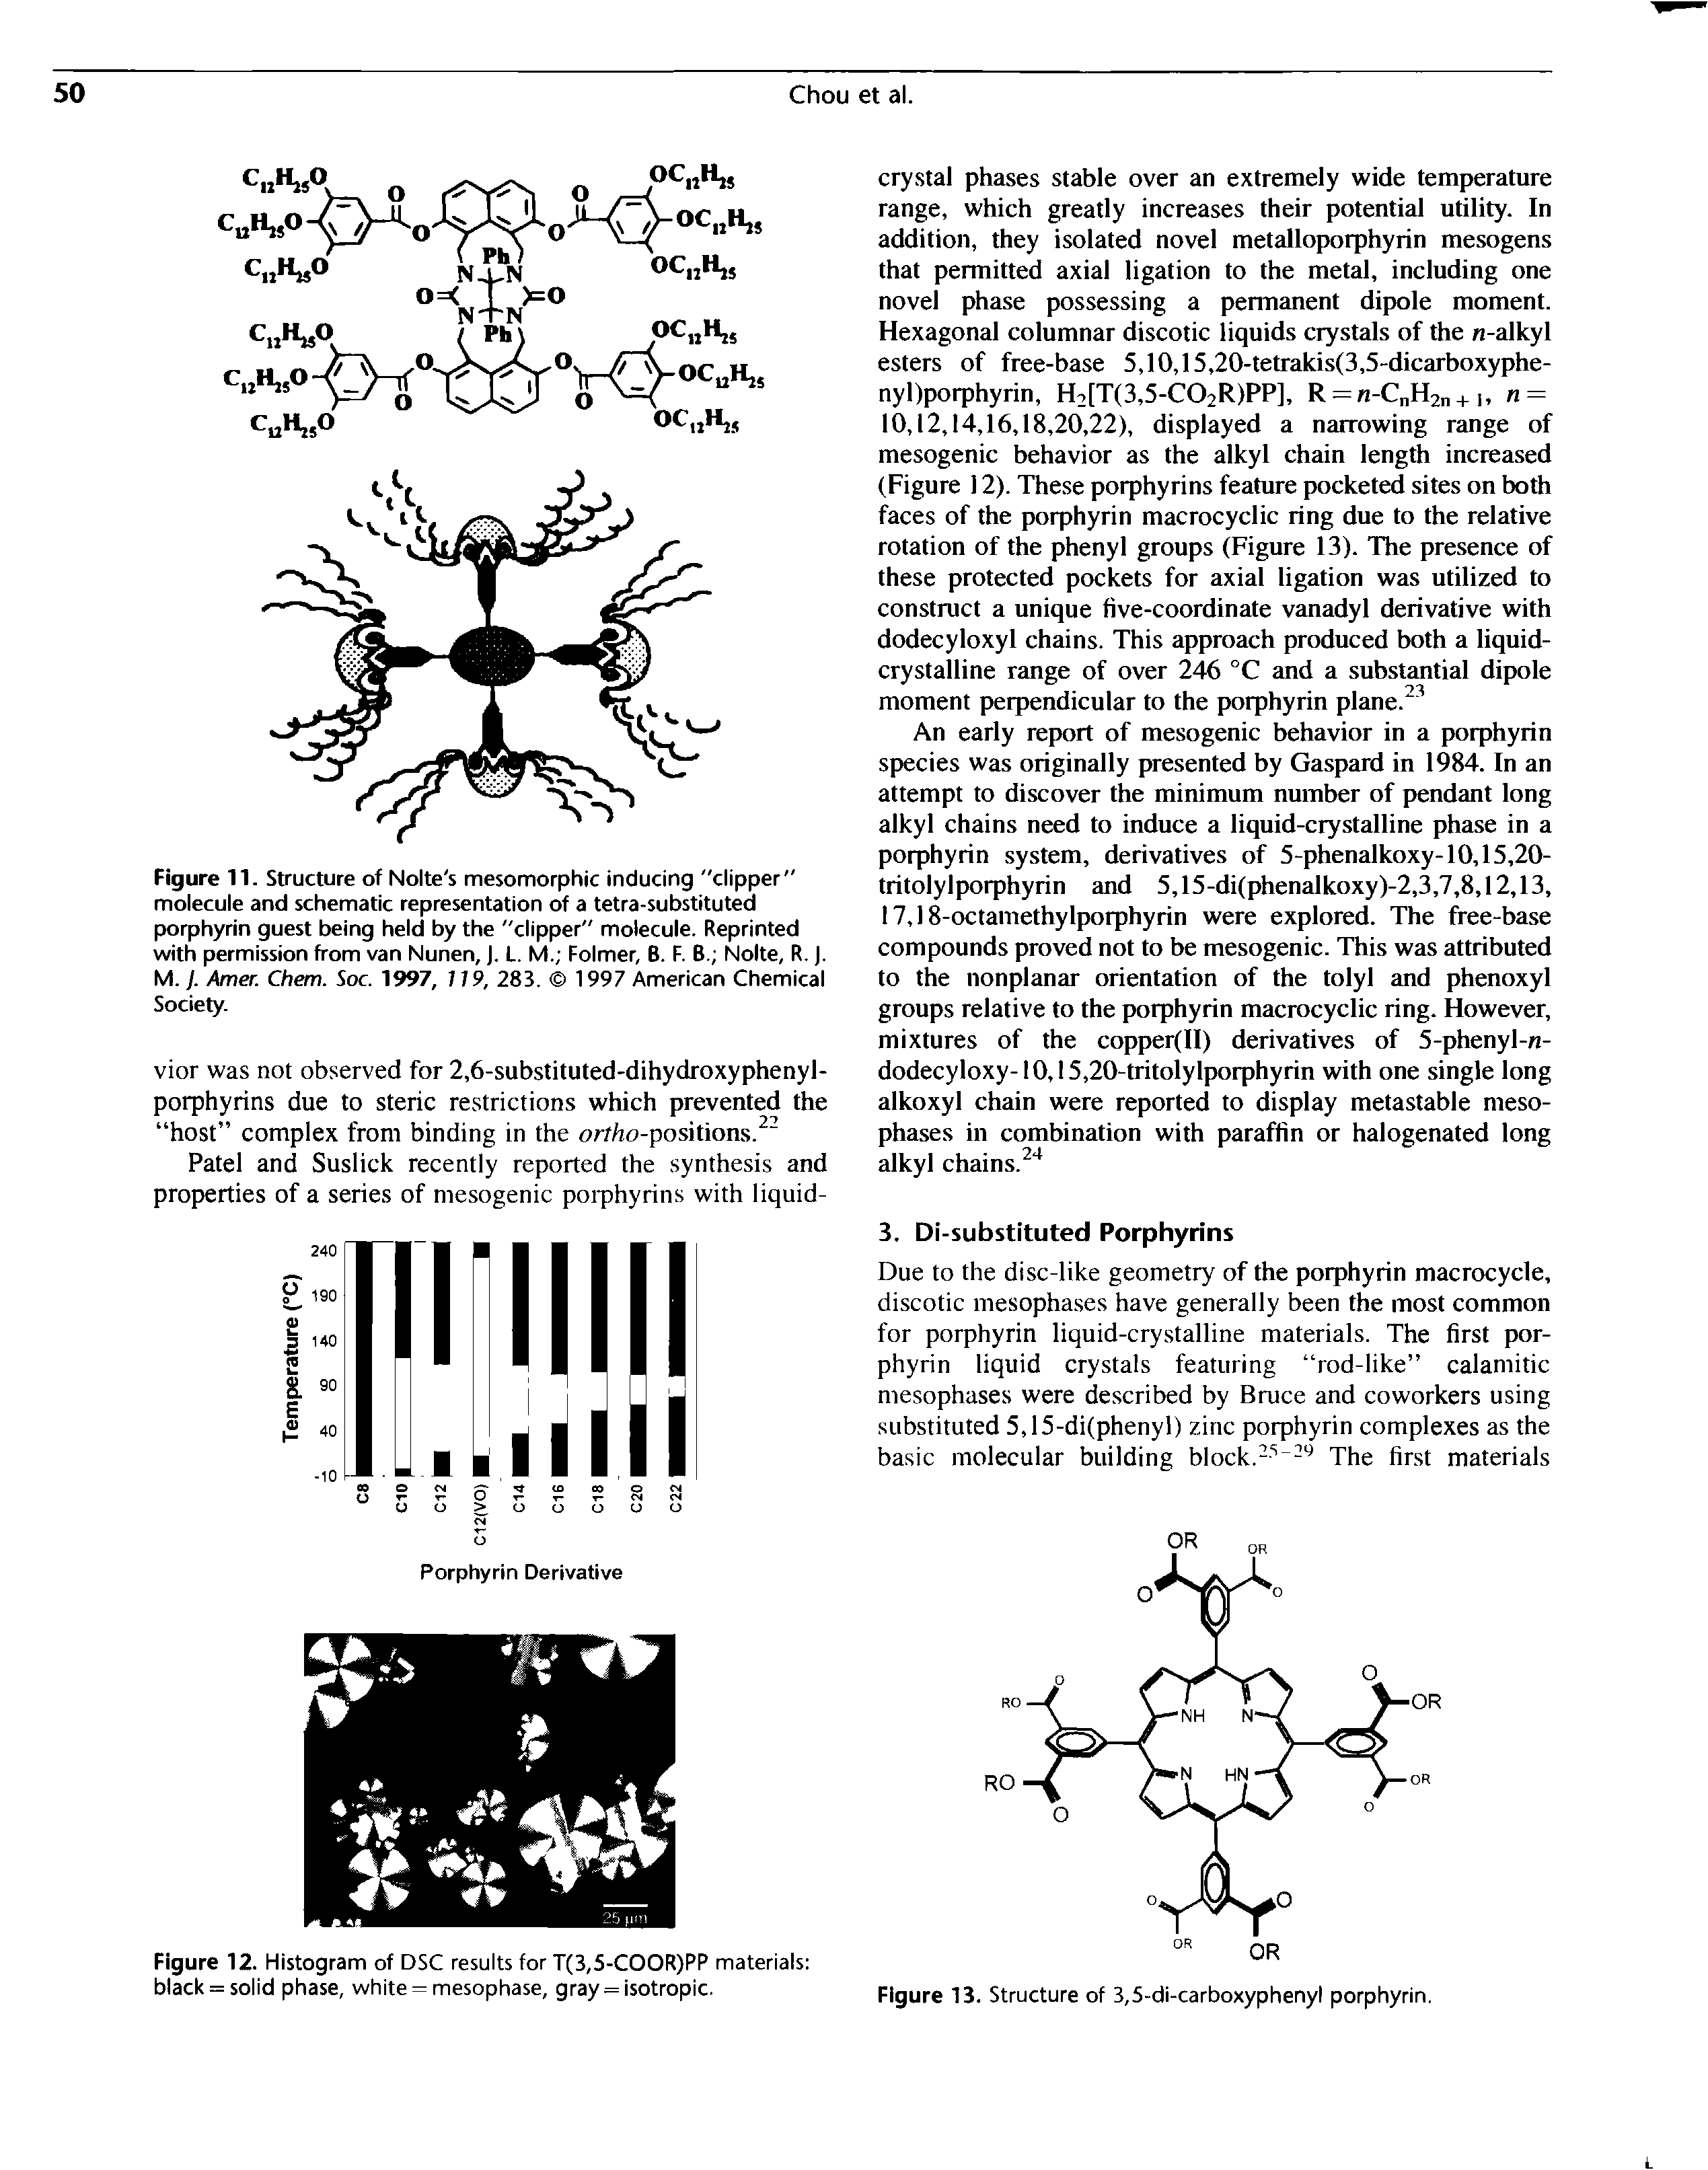 Figure 11. Structure of Nolte s mesomorphic inducing "clipper" molecule and schematic representation of a tetra-substituted porphyrin guest being held by the "clipper" molecule. Reprinted with permission from van Nunen,. L. M. Folmer, B. F. B. Nolle, R.. M. y. Amer. Chem. Soc. 1997, 7 79, 283. 1997 American Chemical Society.